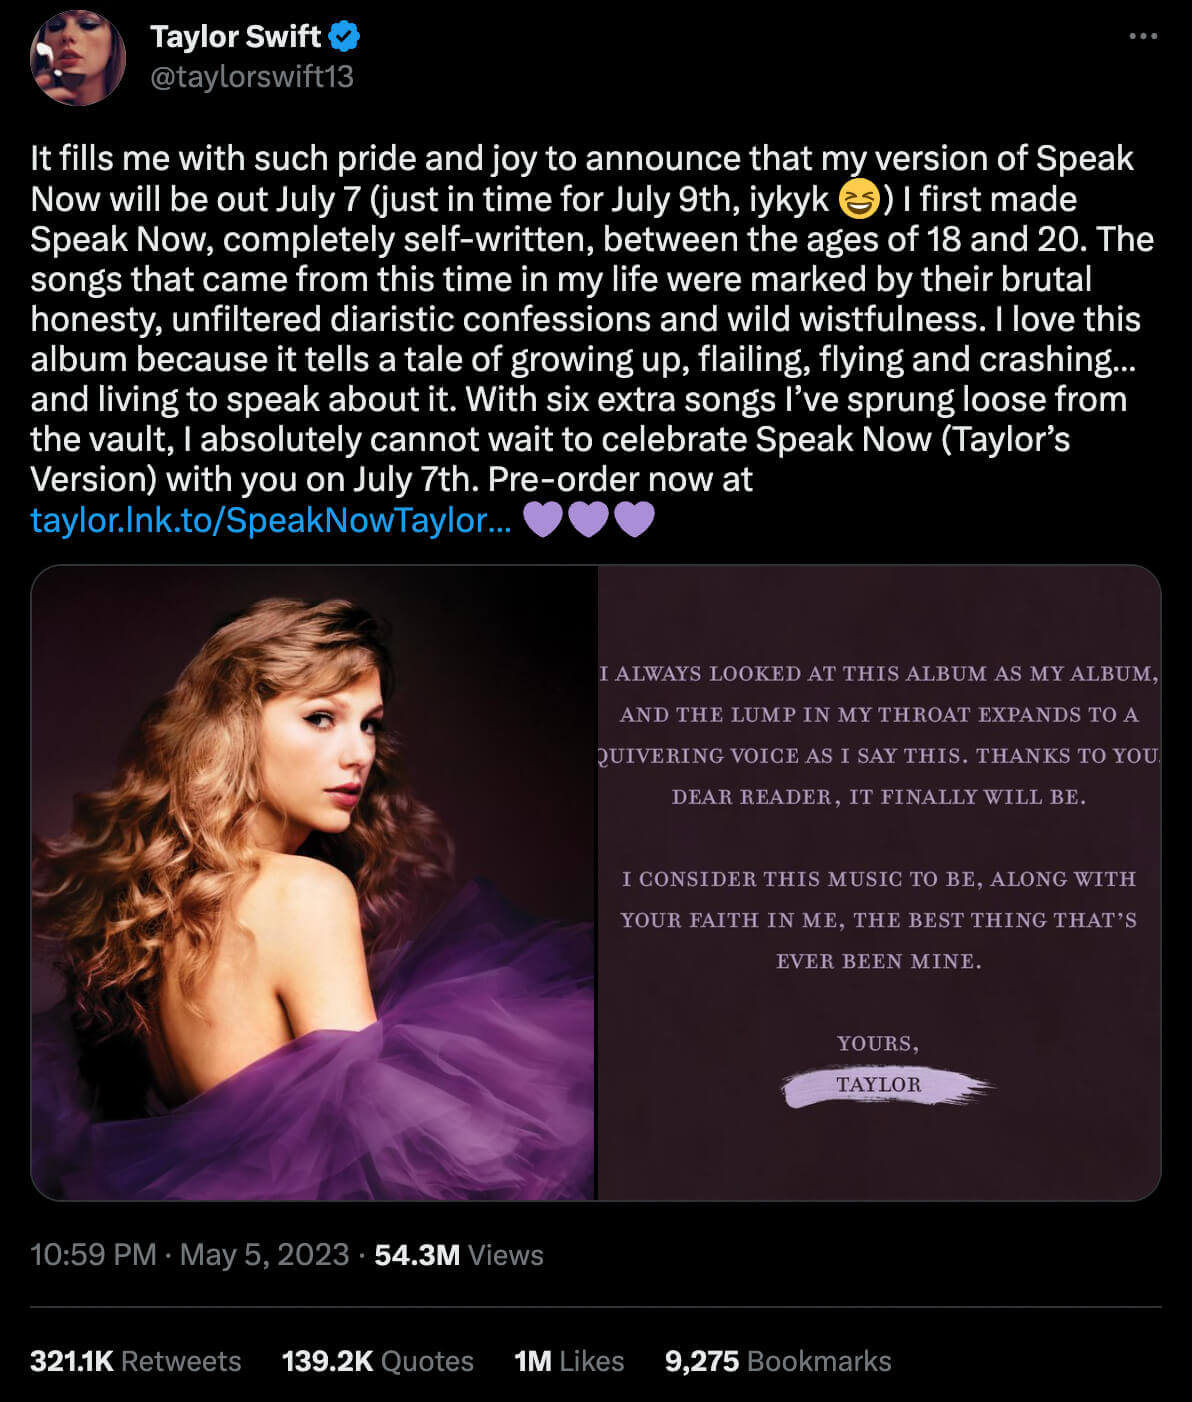 Taylor Swift using IYKYK in a tweet to reference the July 9th date mentioned in her &quot;Last Kiss&quot; song